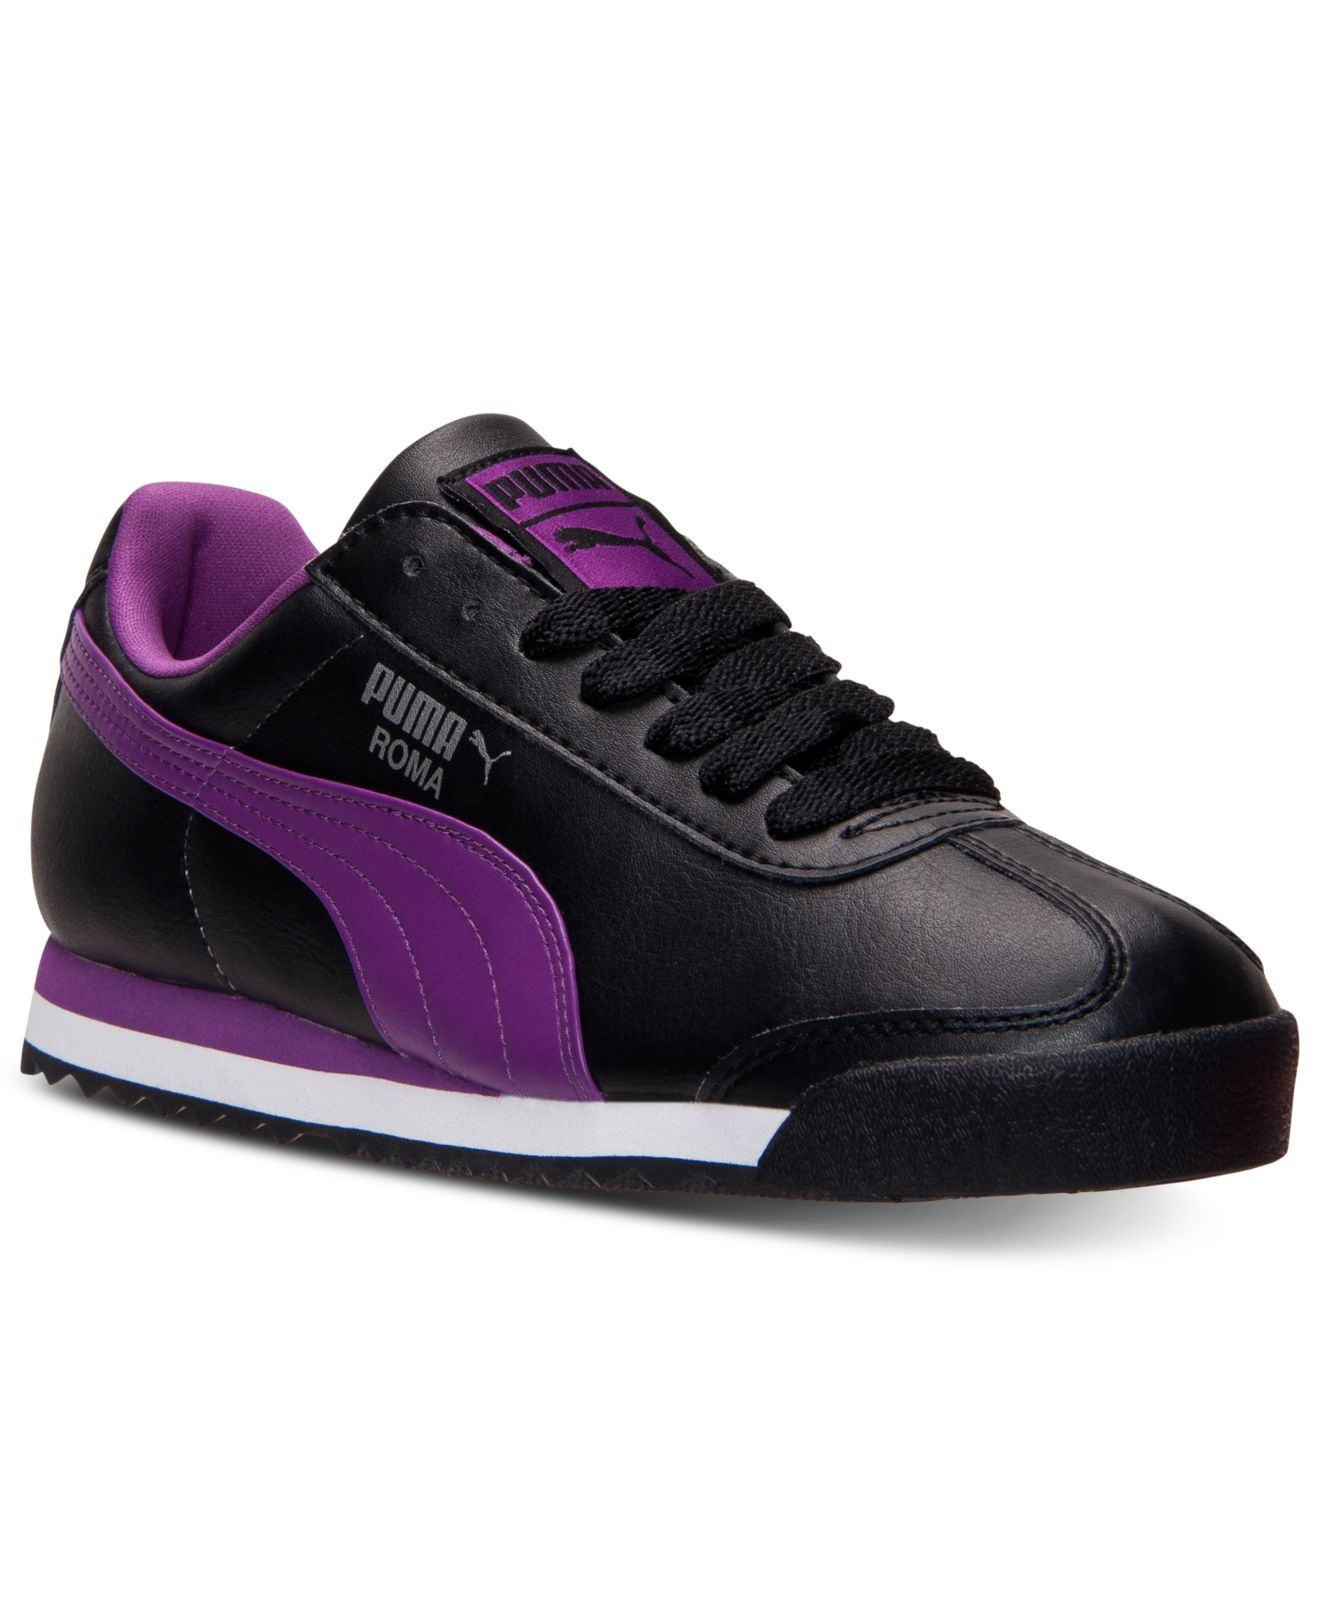 Lyst - Puma Women'S Roma Basic Casual Sneakers From Finish Line in Black